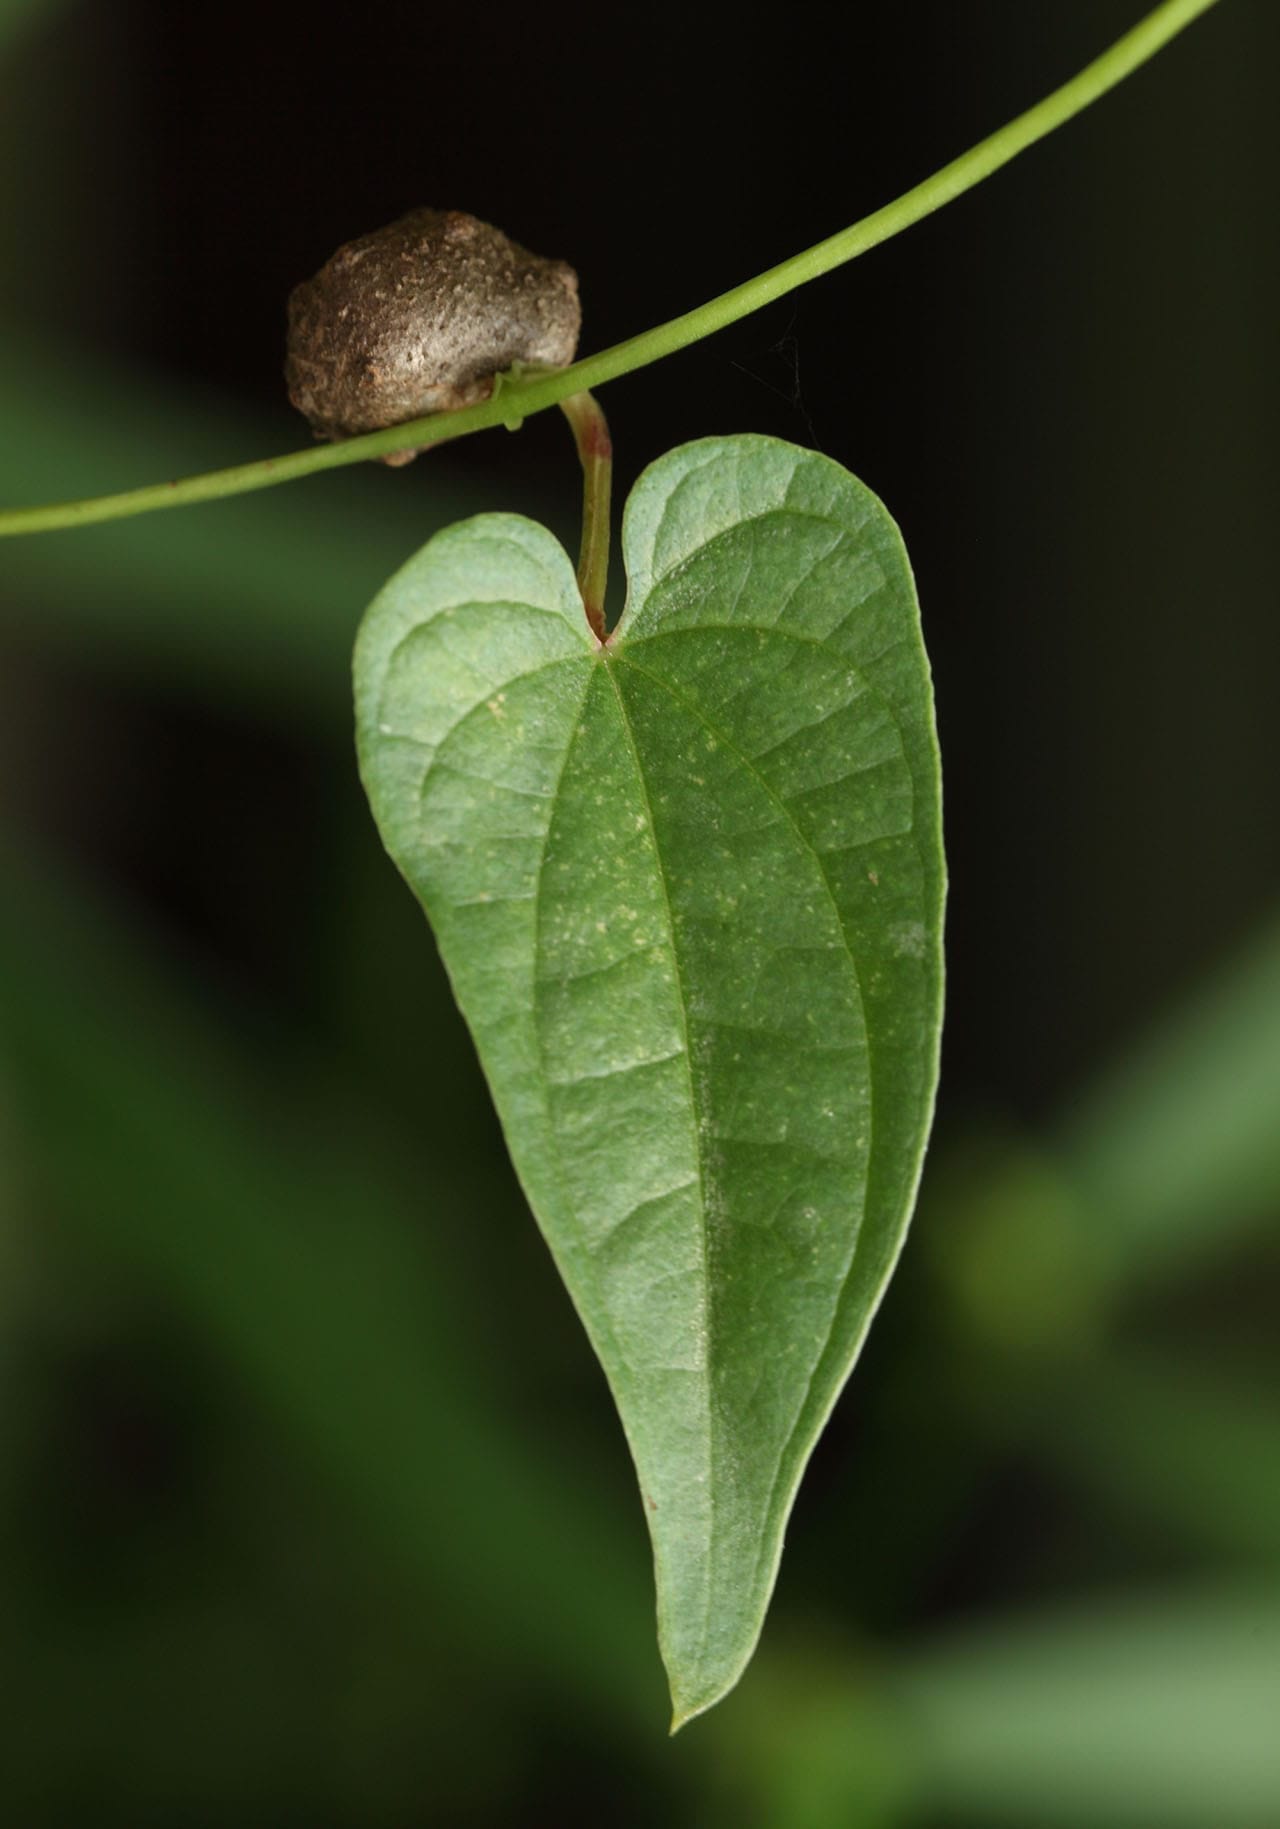 Leaf and bulblet